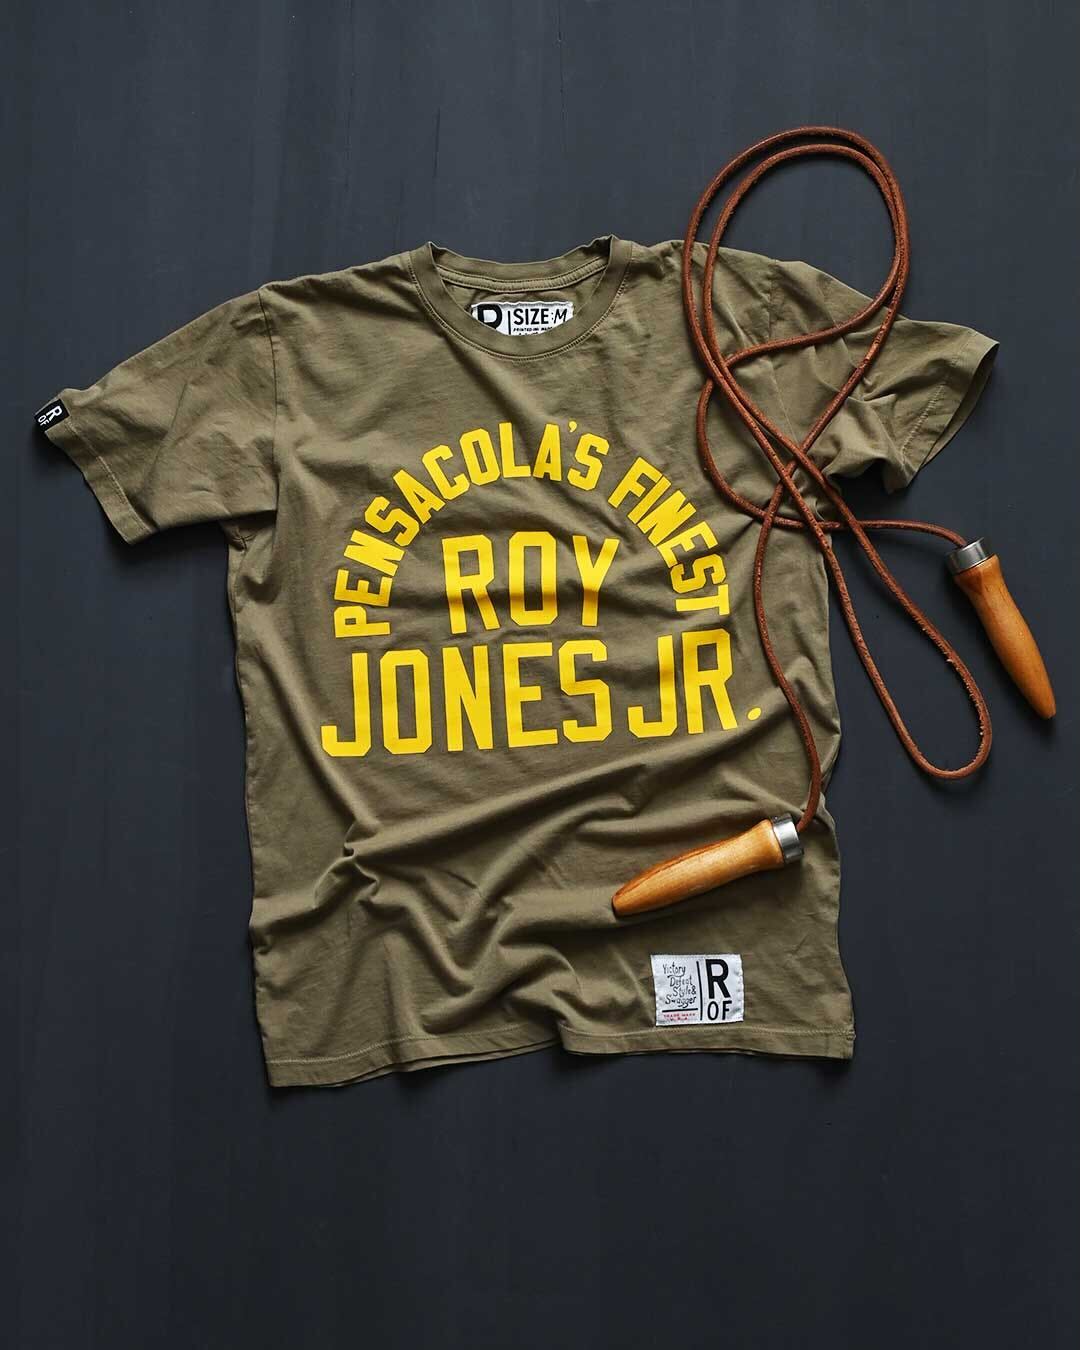 Roy Jones Jr. Pensacola&#39;s Finest Olive Tee - Roots of Fight Canada